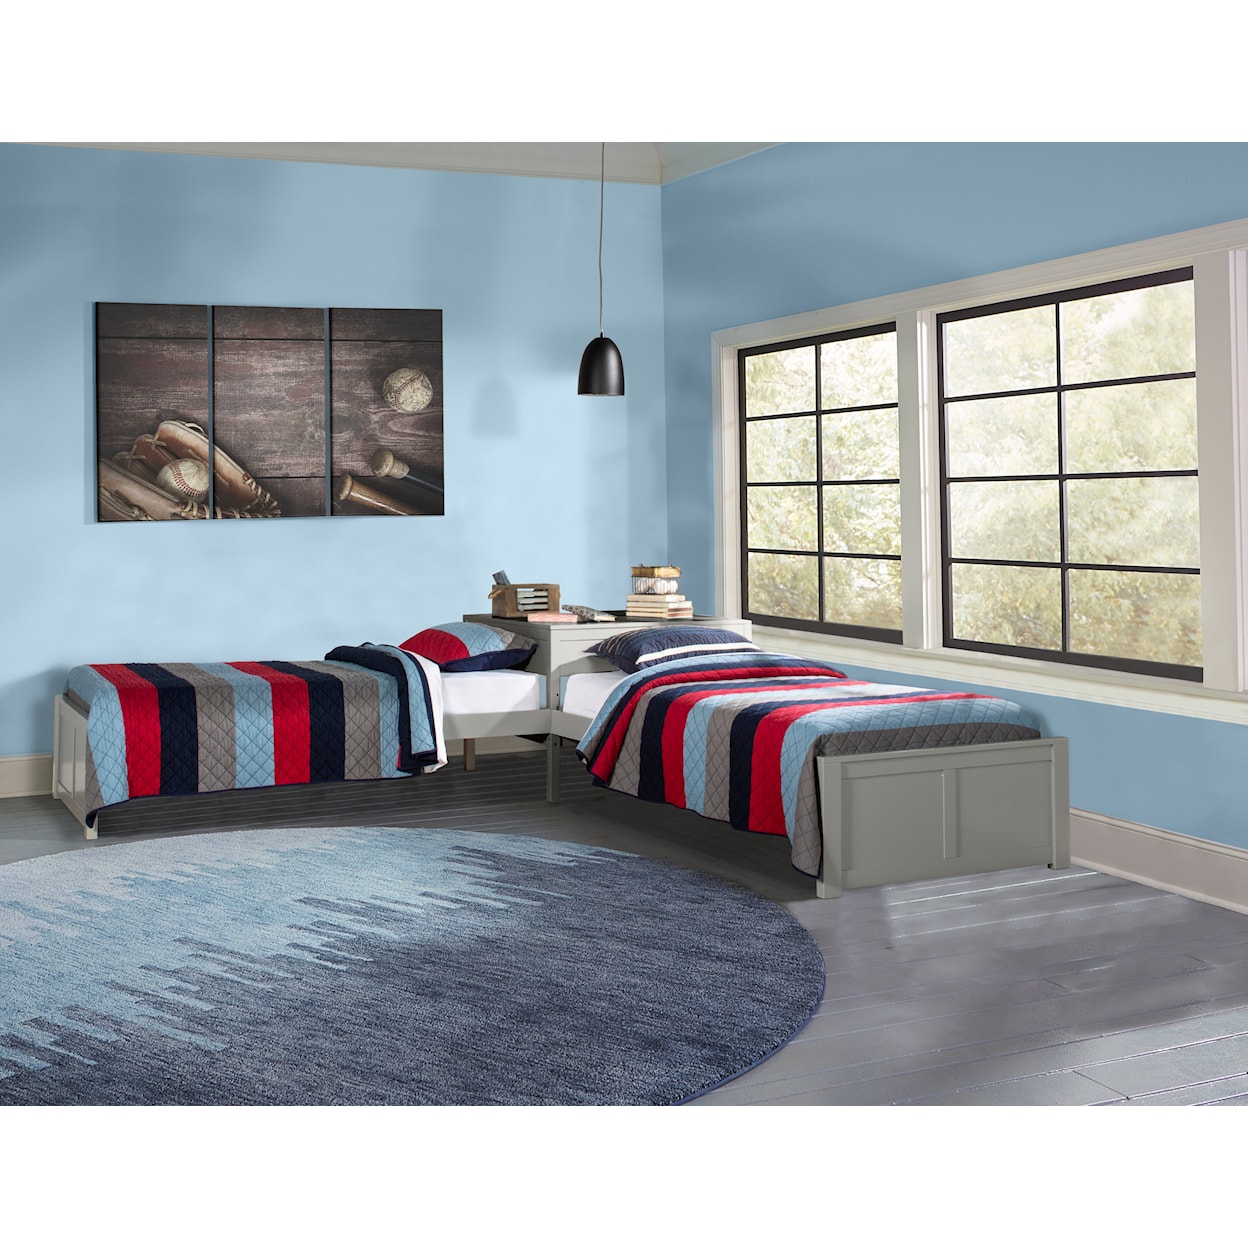 Hillsdale Pulse Twin Bed